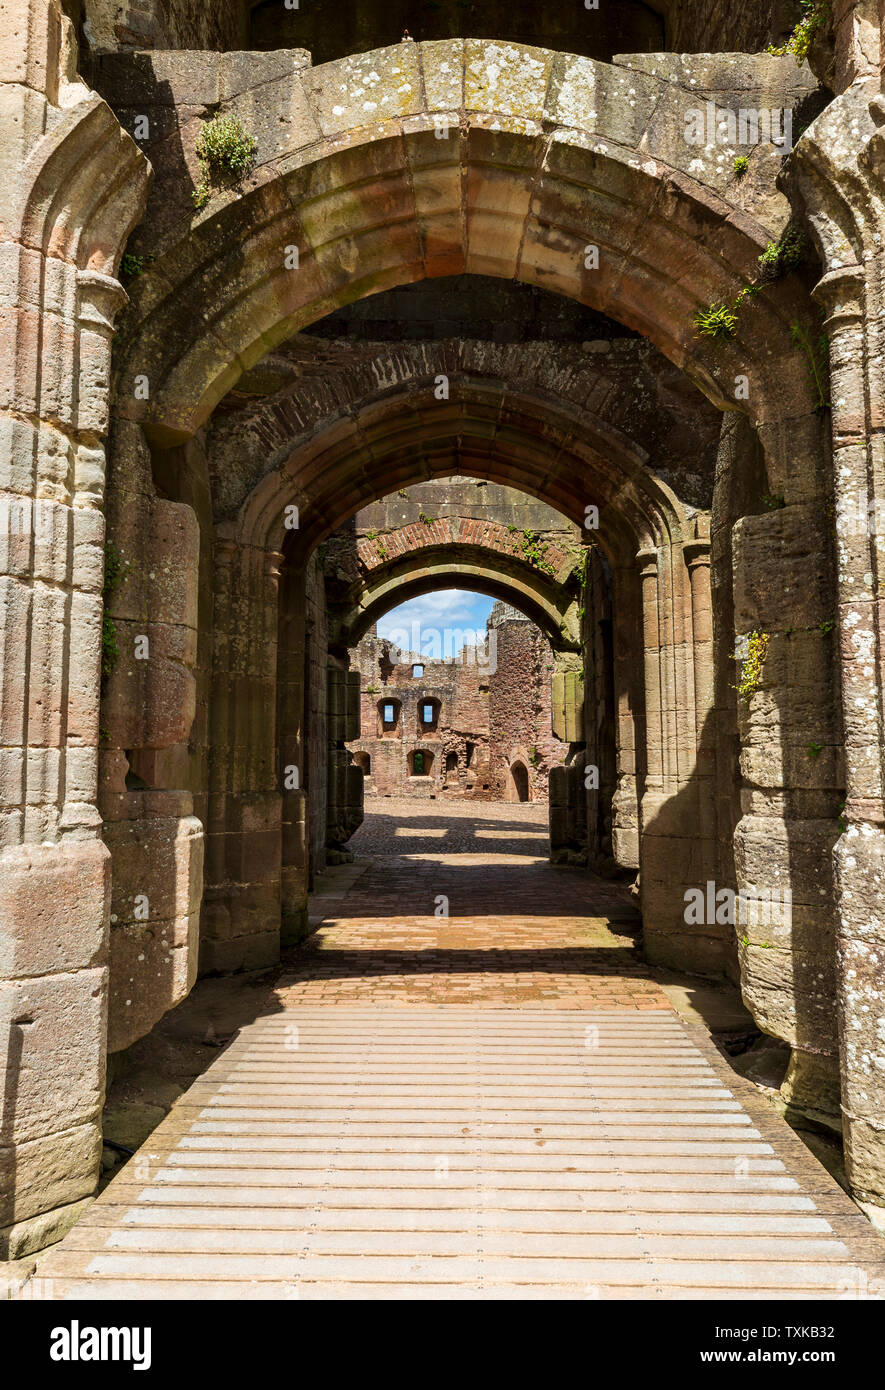 A view through the Main Gate into the Pitched Stone Court at Raglan Castle, Wales Stock Photo